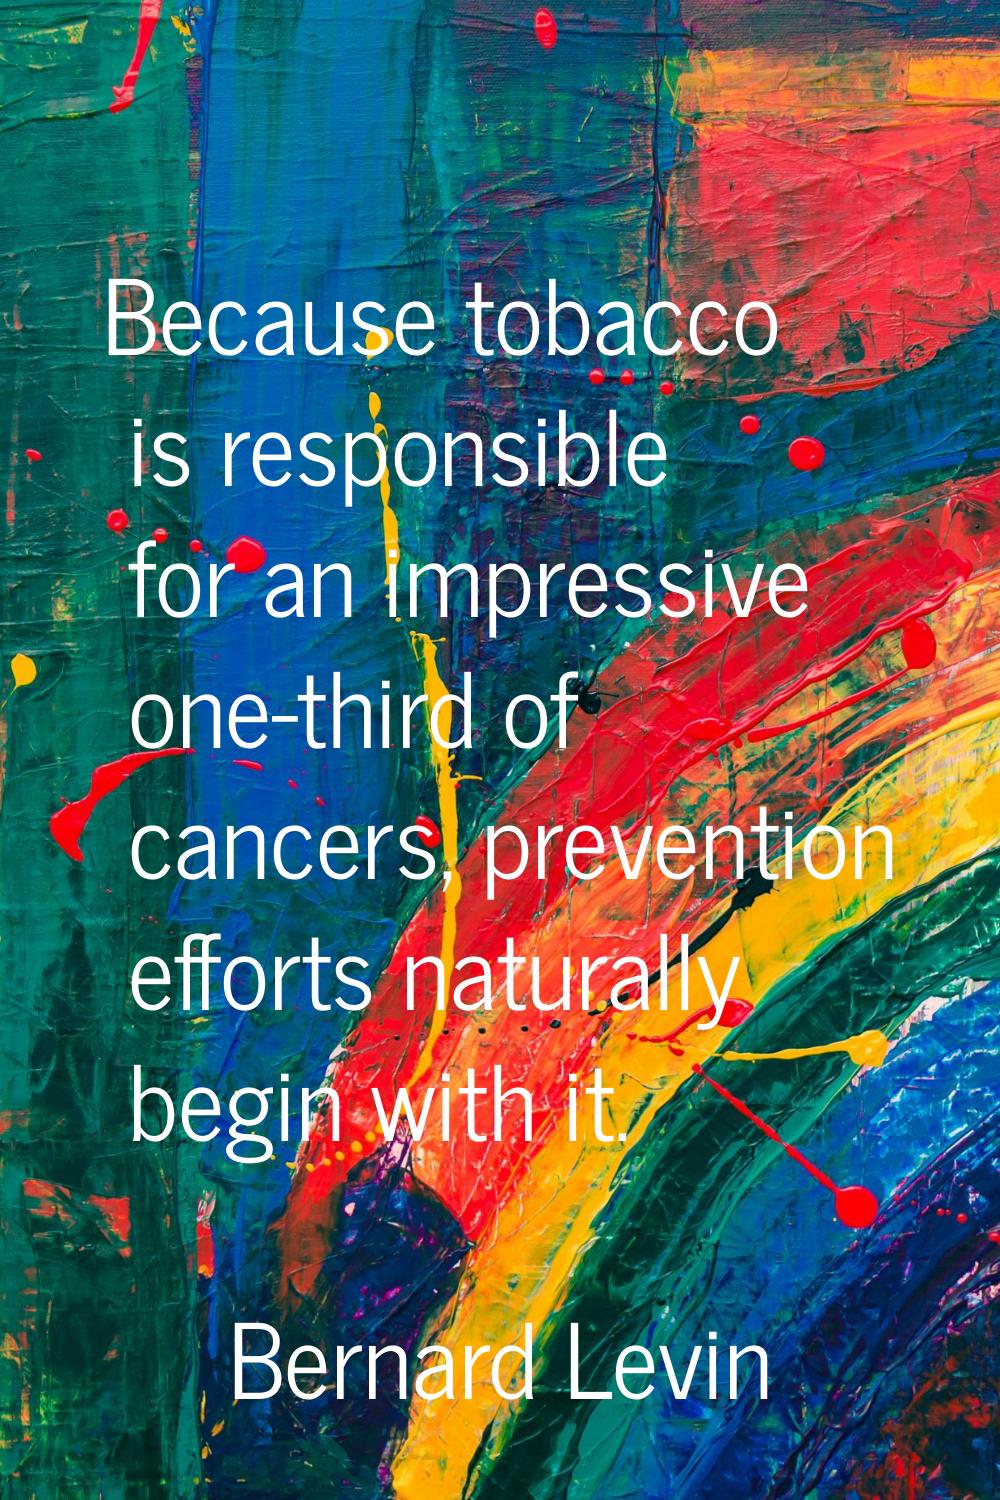 Because tobacco is responsible for an impressive one-third of cancers, prevention efforts naturally